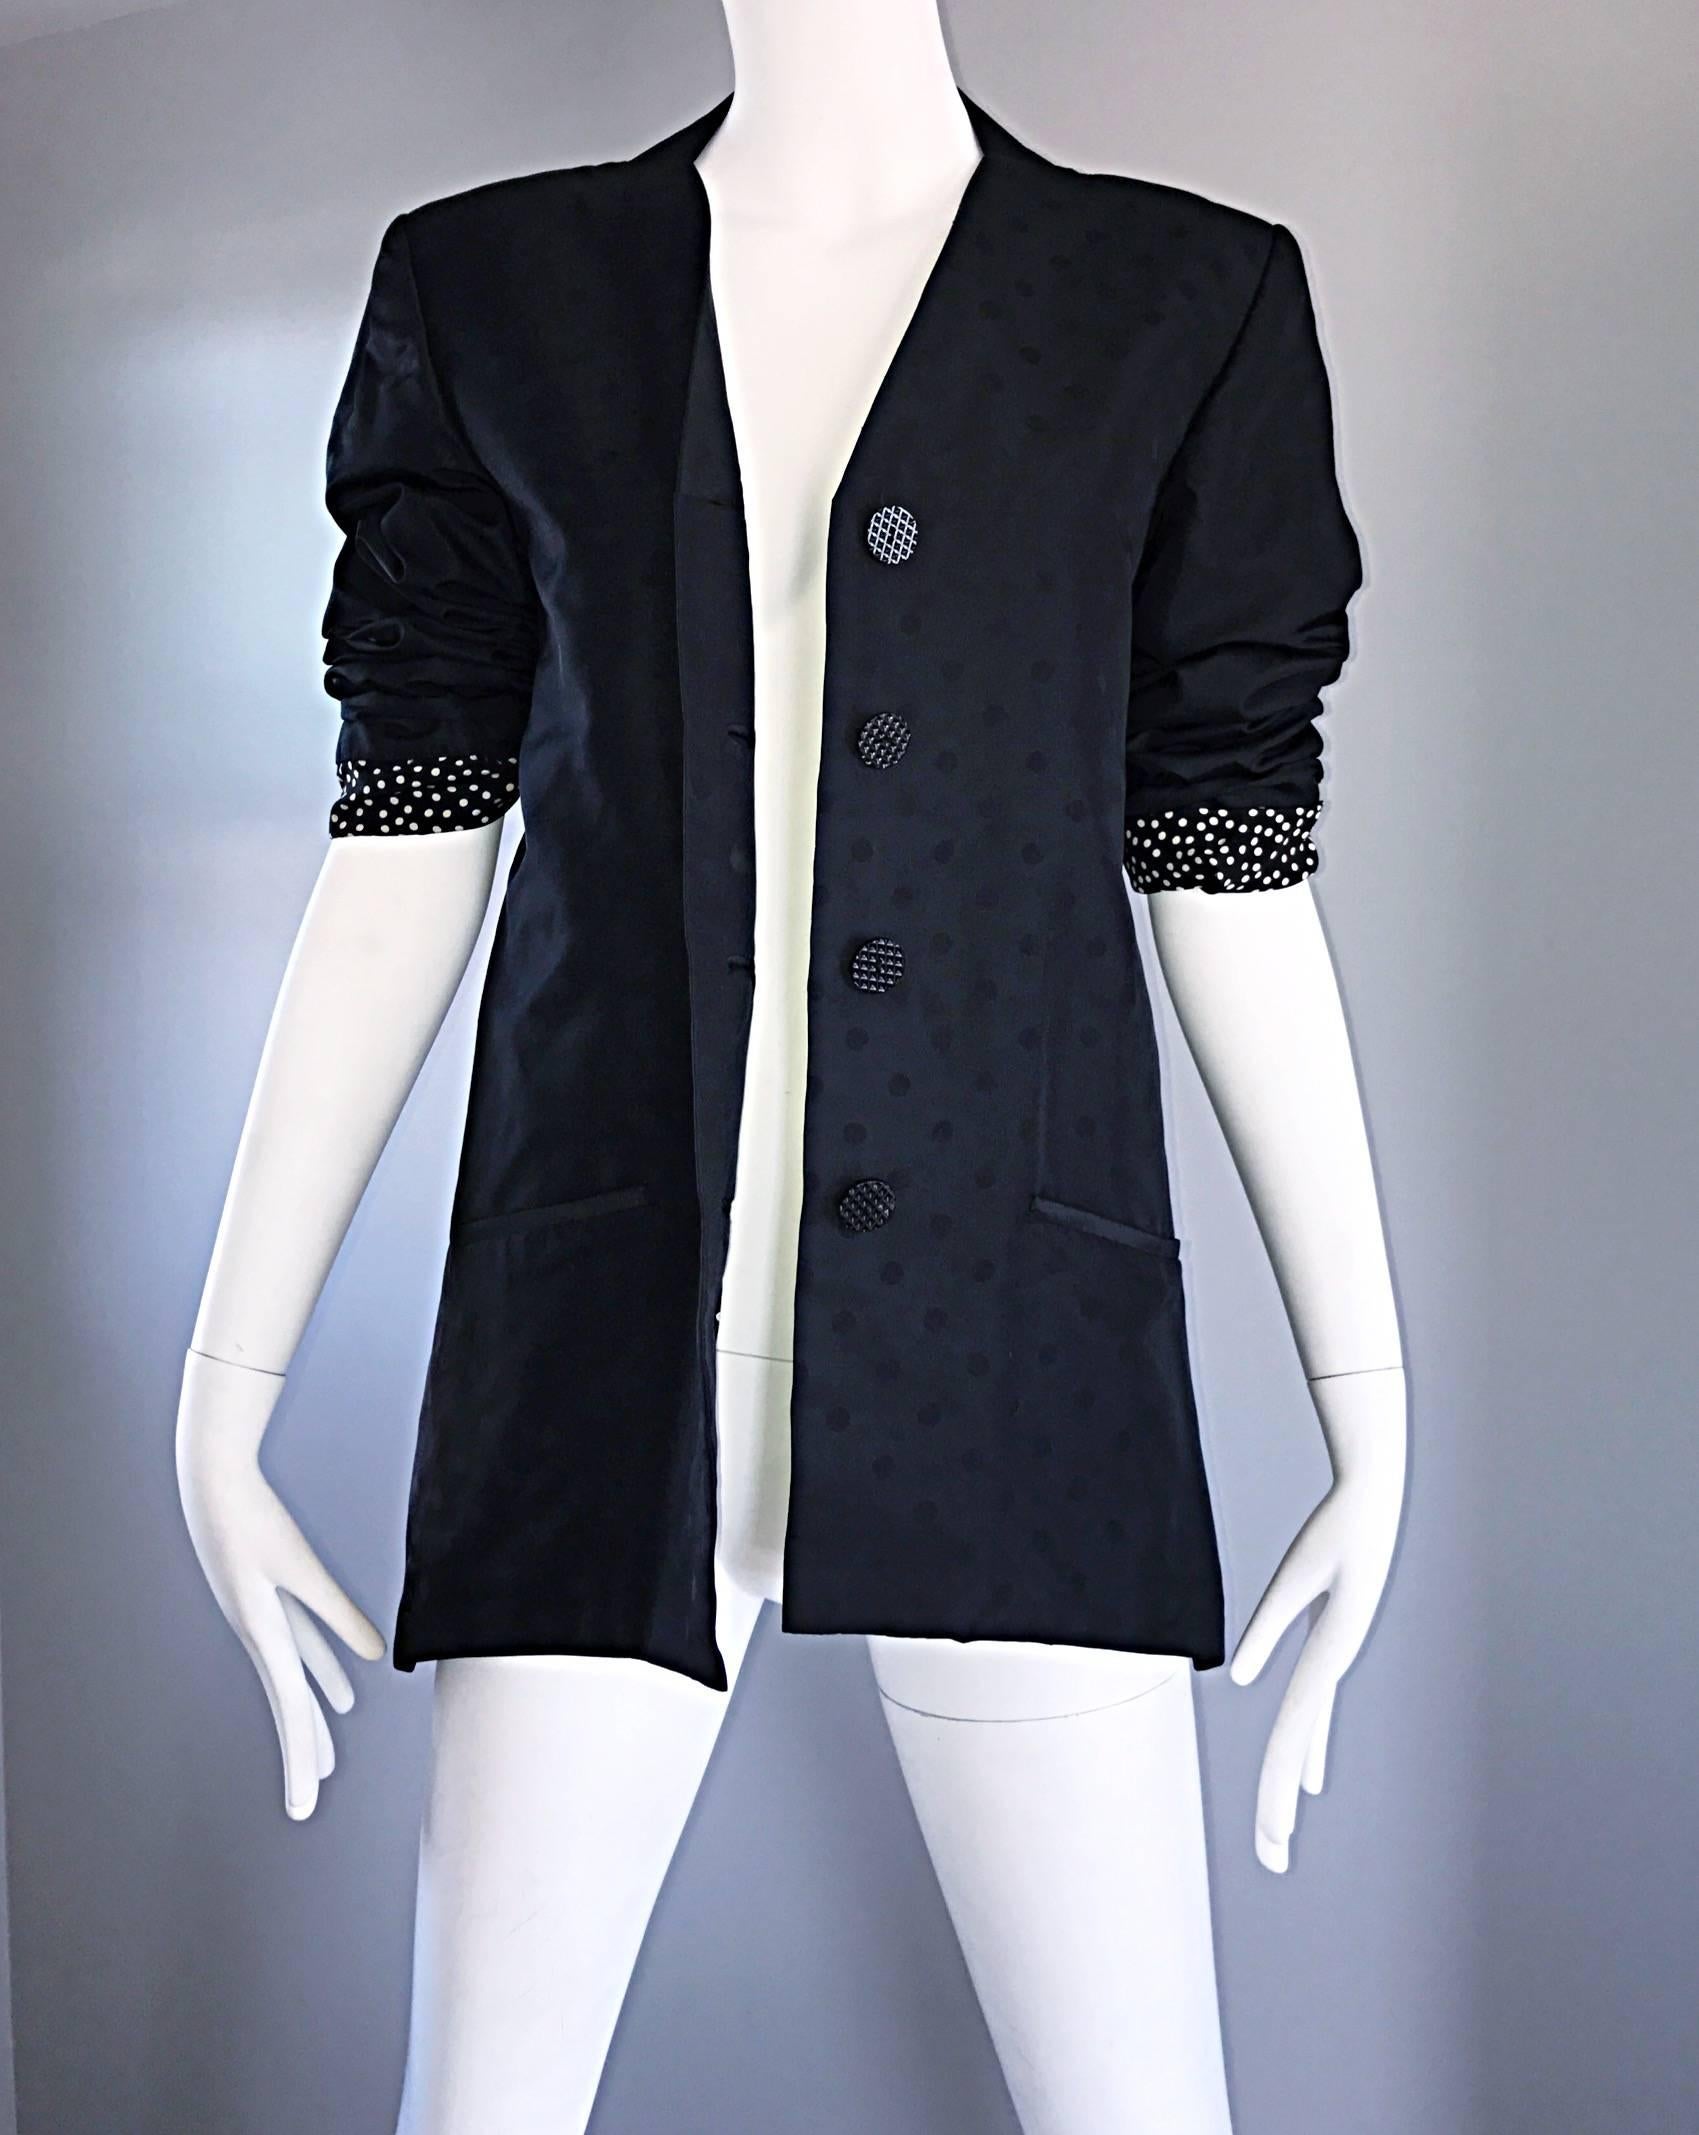 Chic vintage GEOFFREY BEENE classic black jacket! Features a discreet iridescent polka dot print throughout. Four buttons up the front. Pocket at each side of the waist. Lined in chic black and white polka dot printed silk that looks great exposed